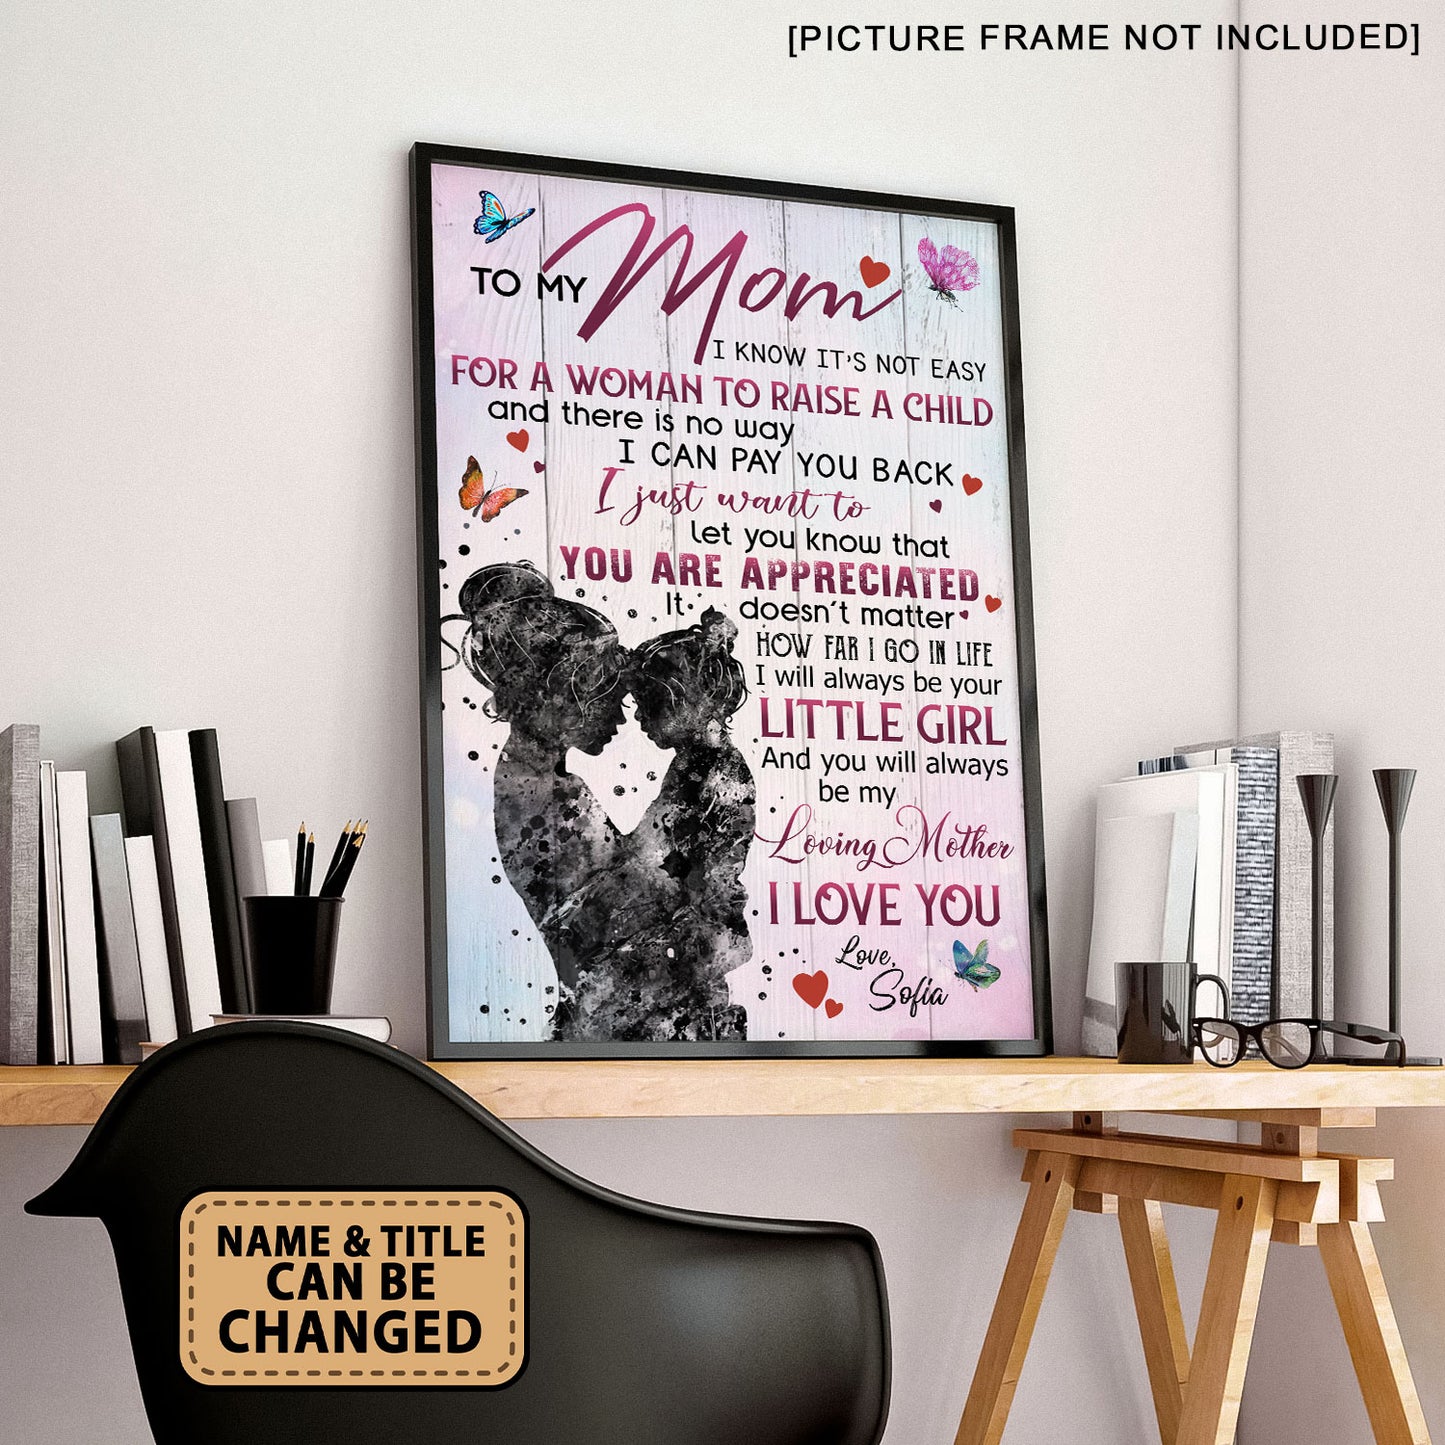 To My Mom I Know It's Not Easy For A Woman To Raise A Child Personalized Poster